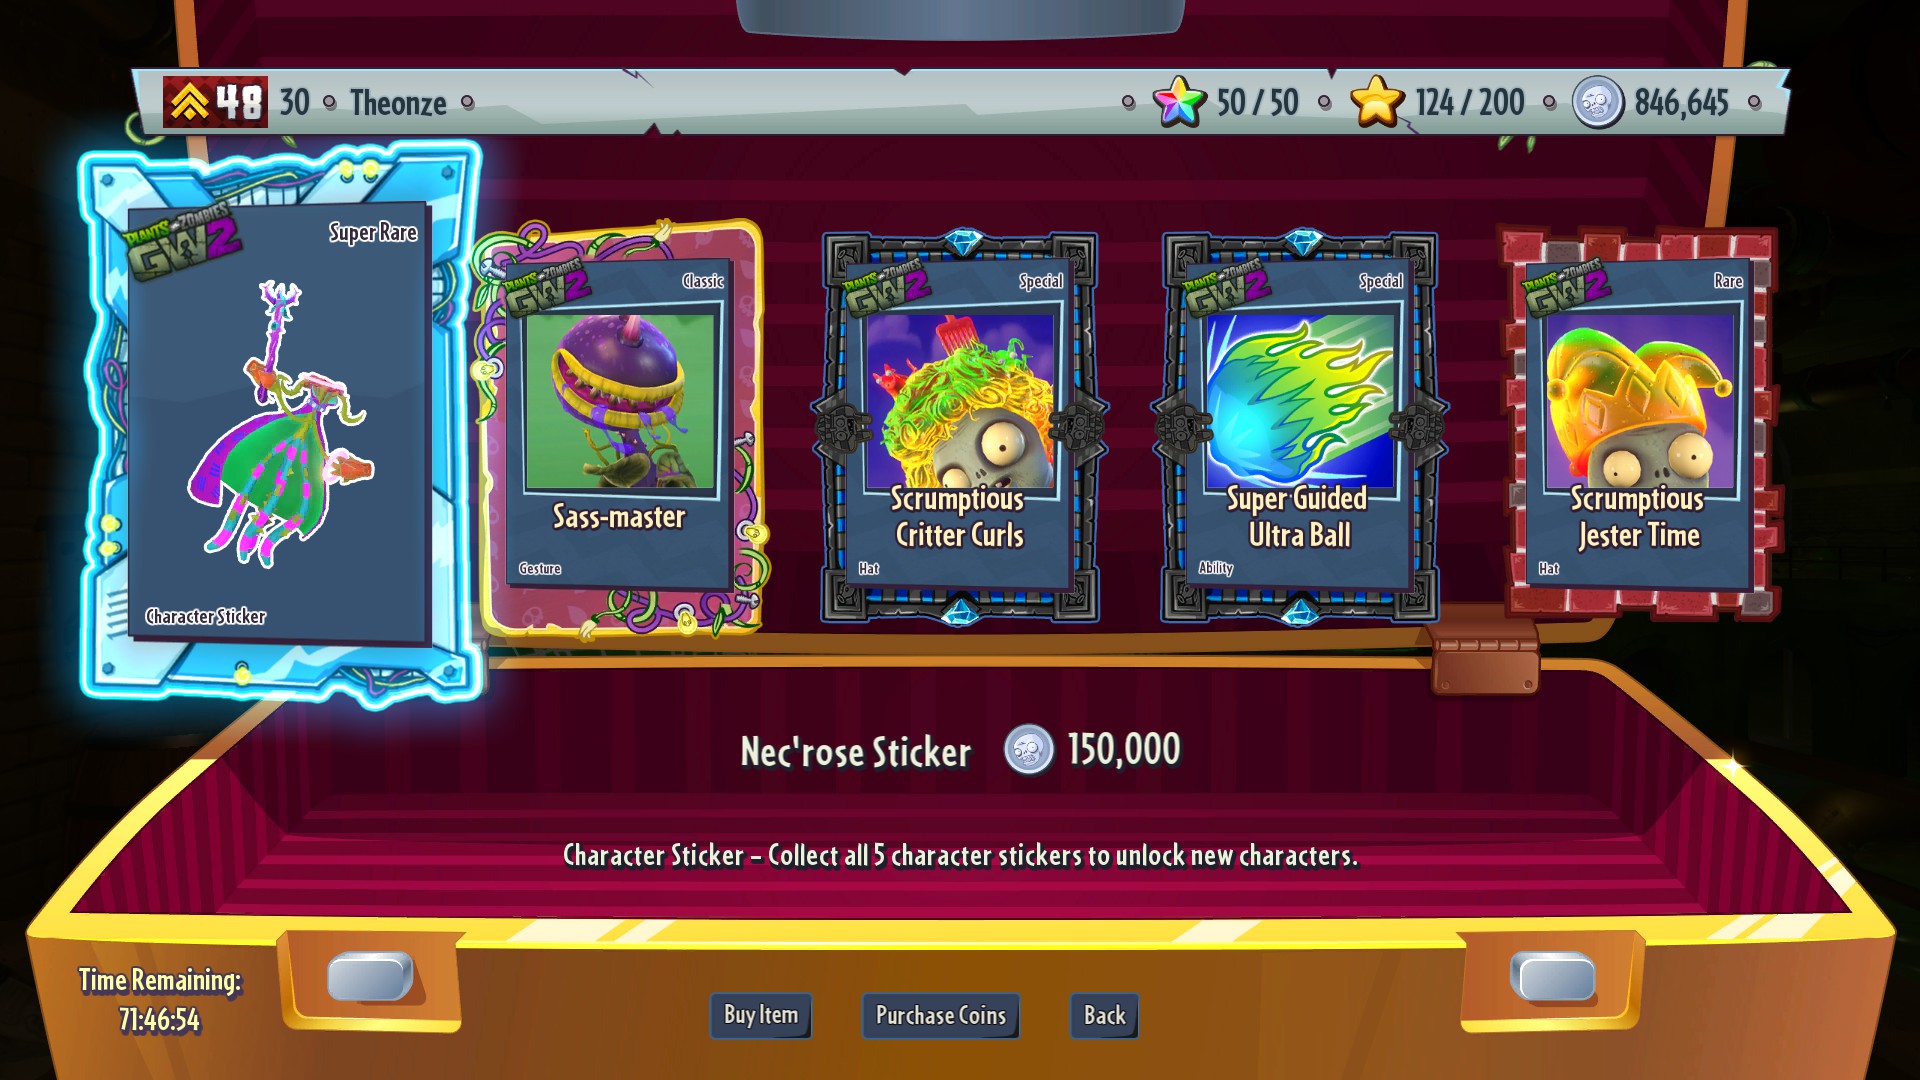 Rux Is Now Selling The New Abilities And A Character Piece For A